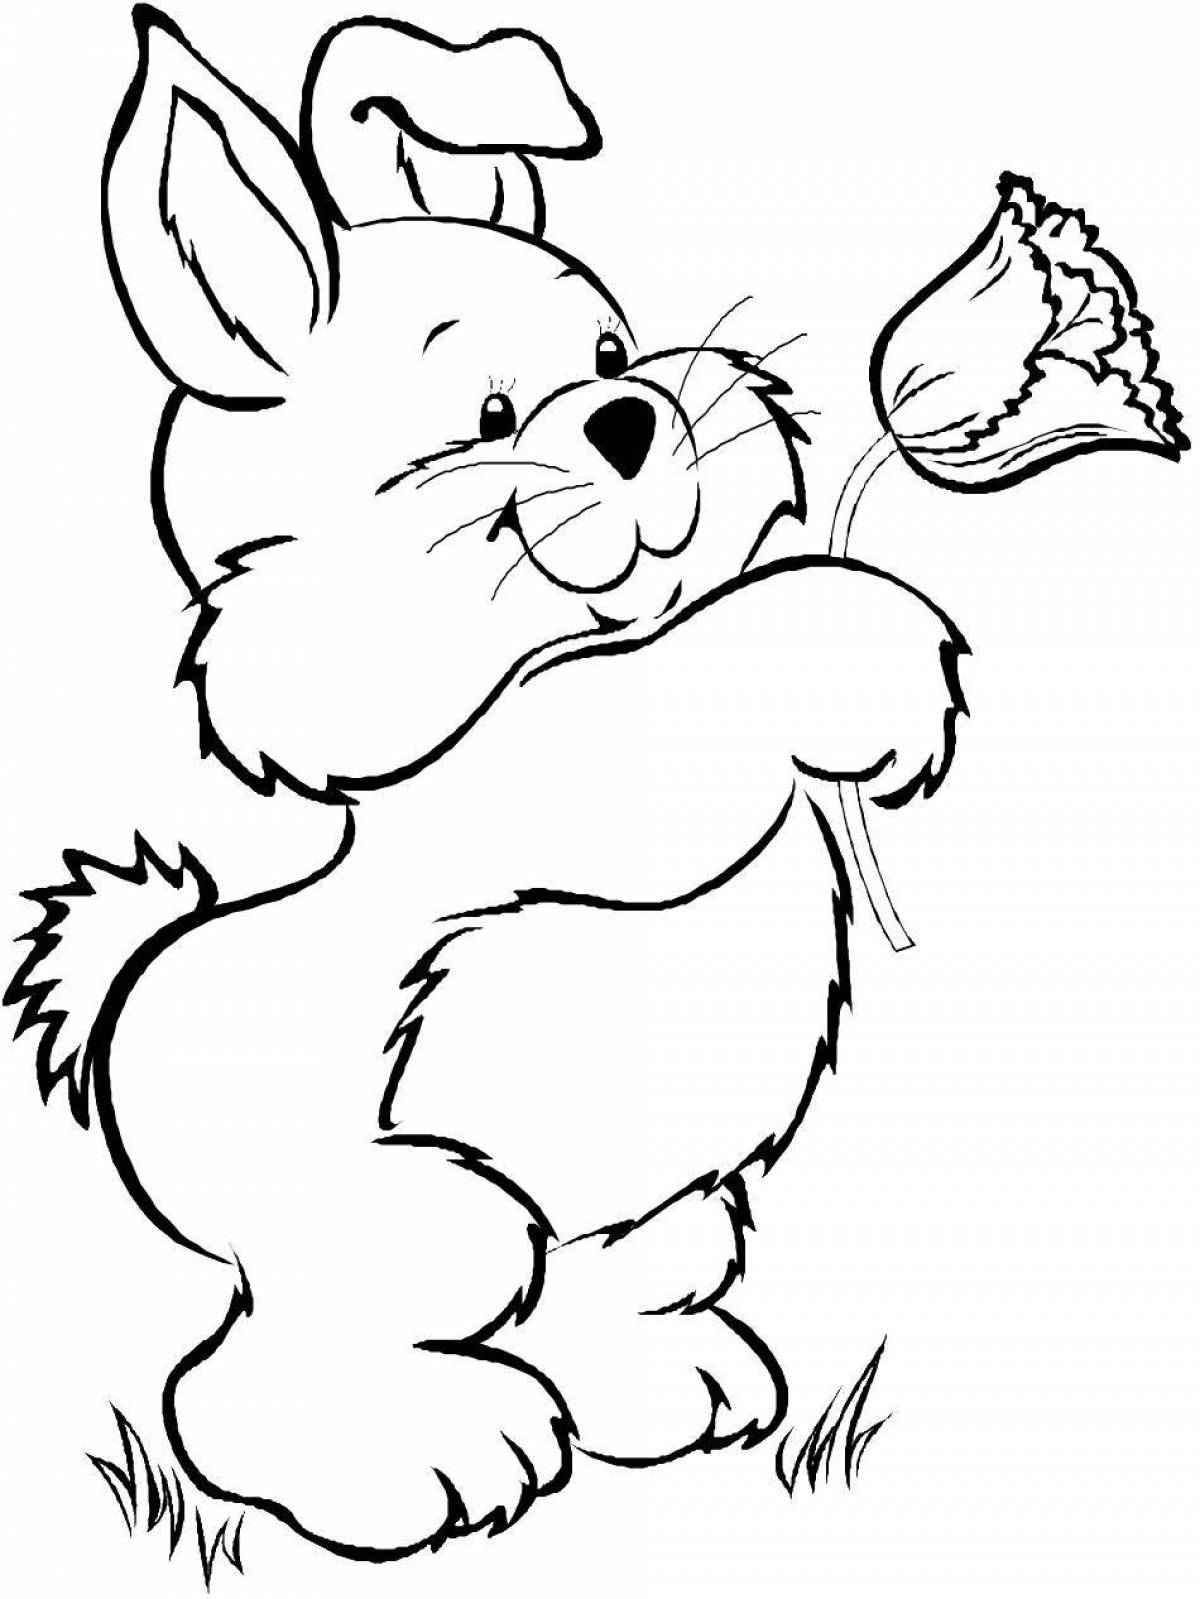 Cute bunny coloring page template